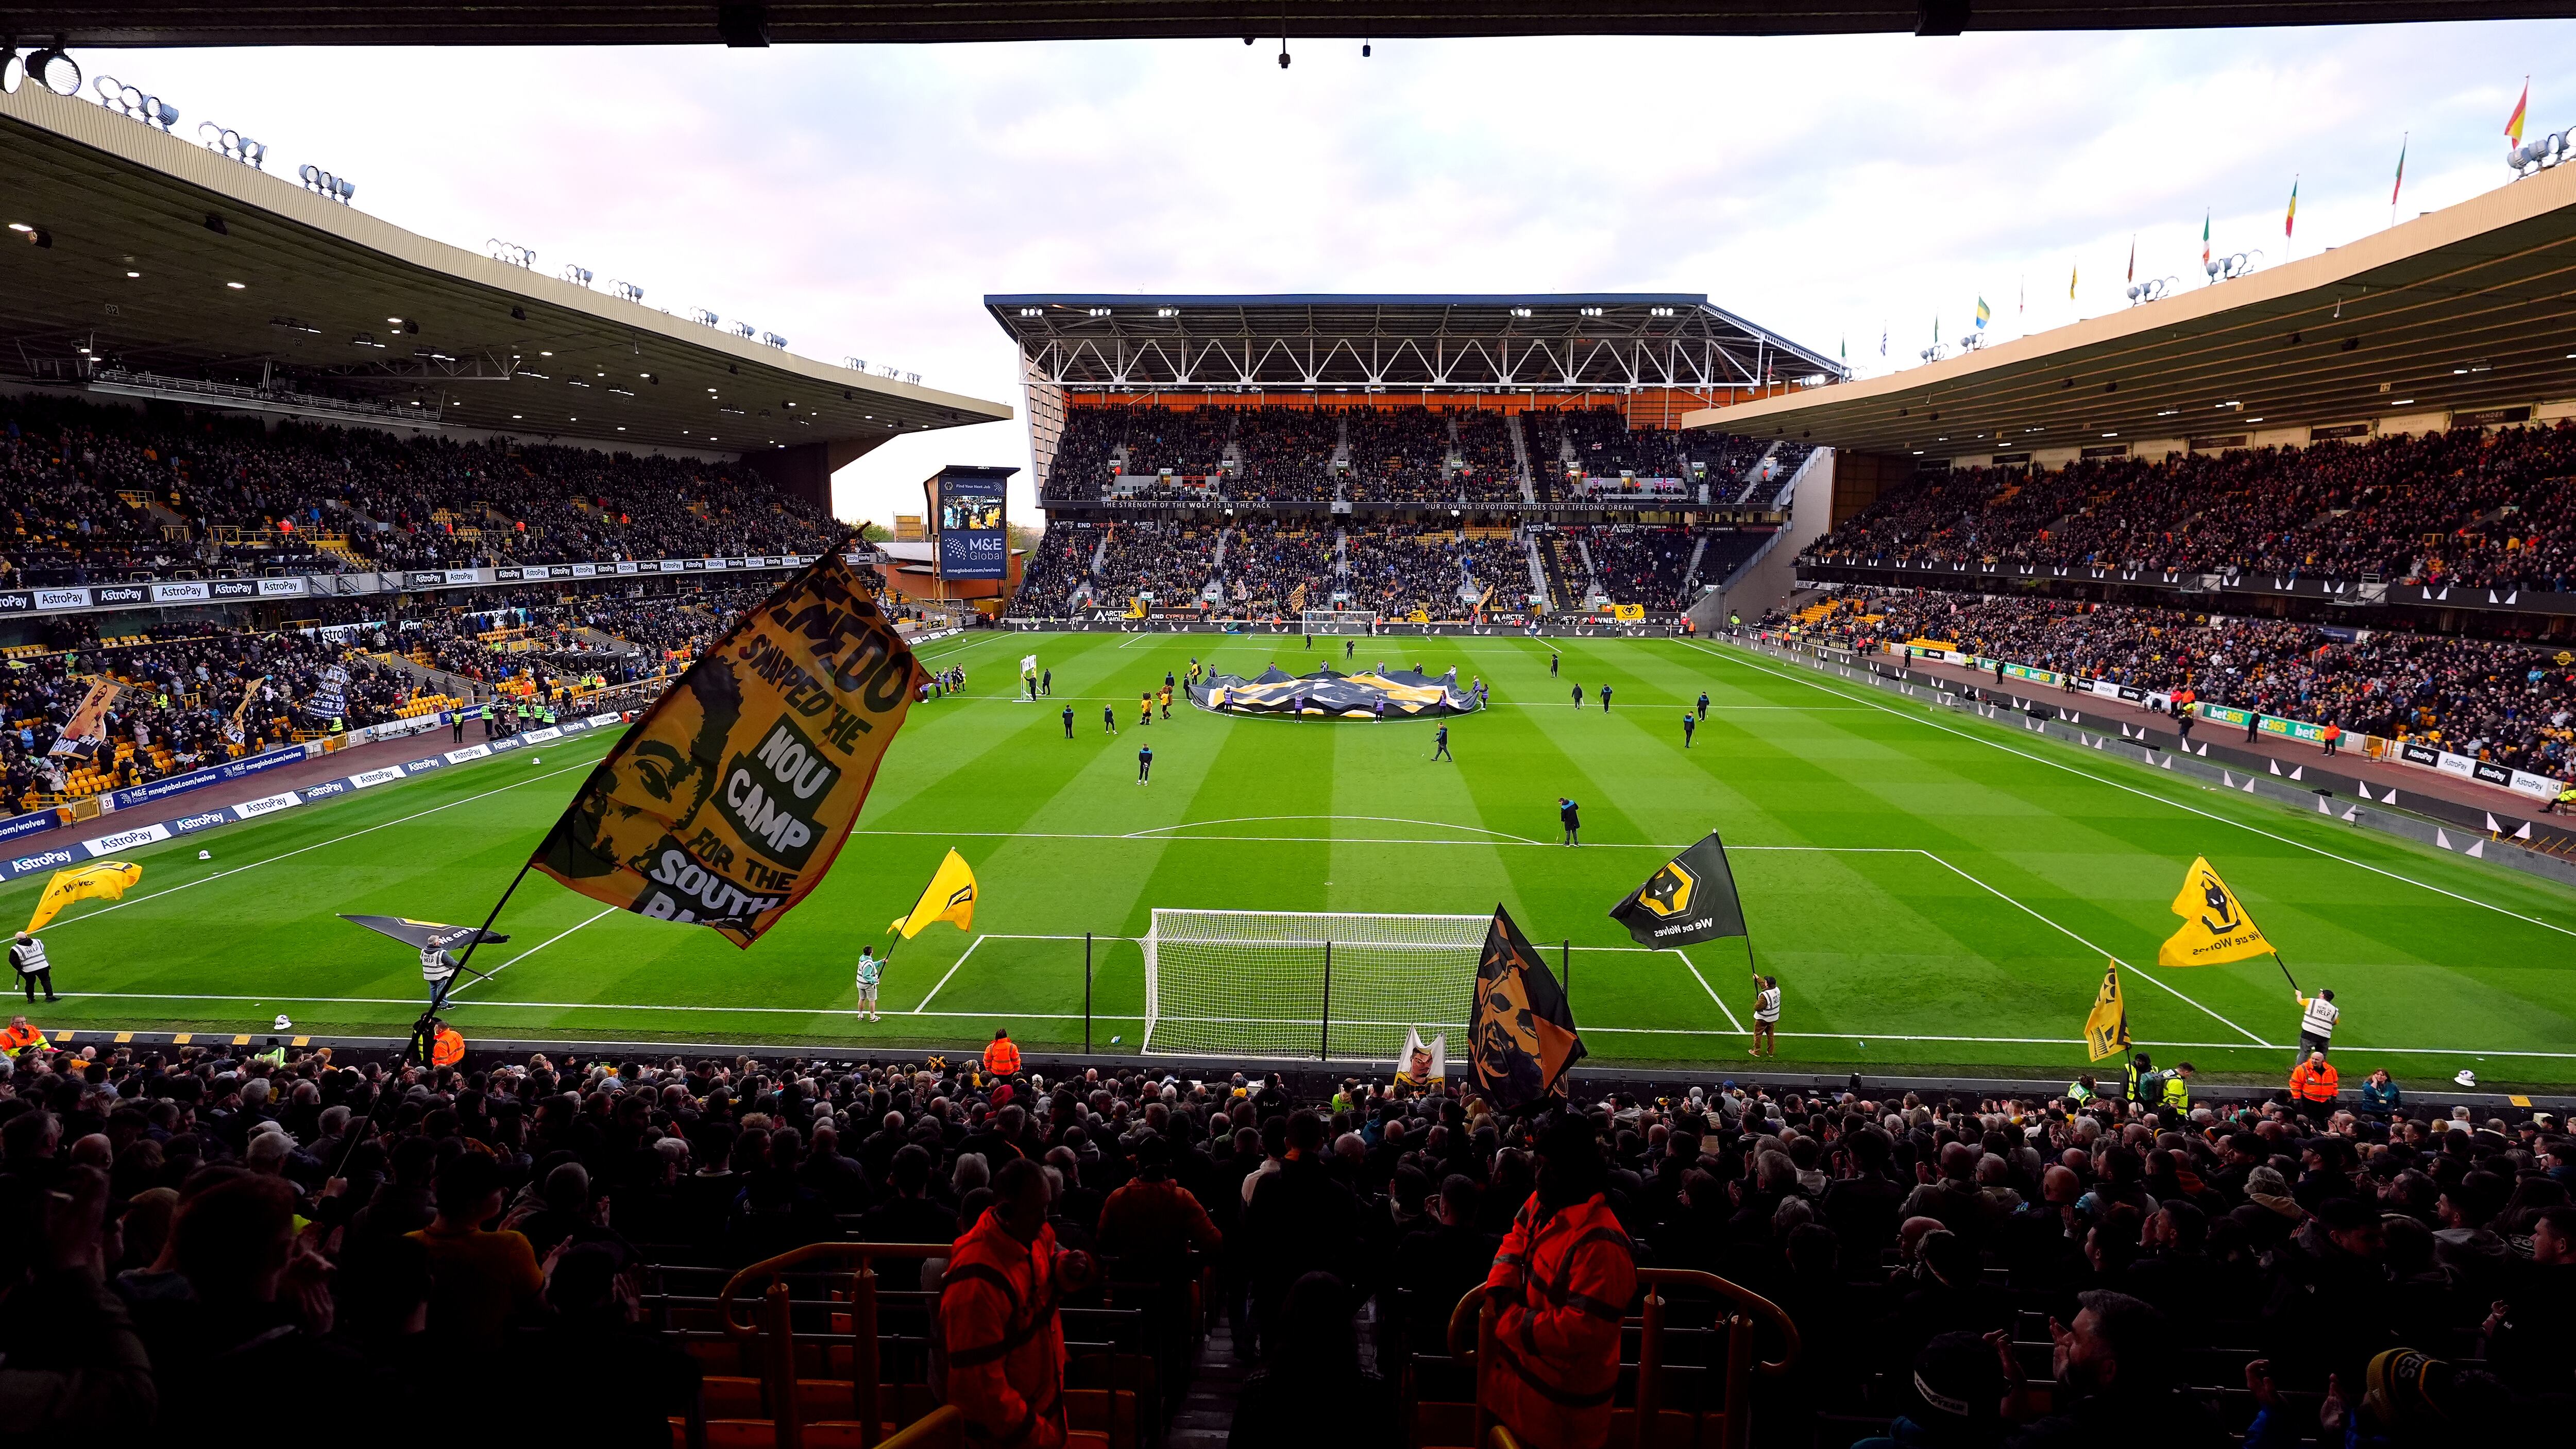 Wolves fans want supporters of other clubs to lobby for VAR to be scrapped